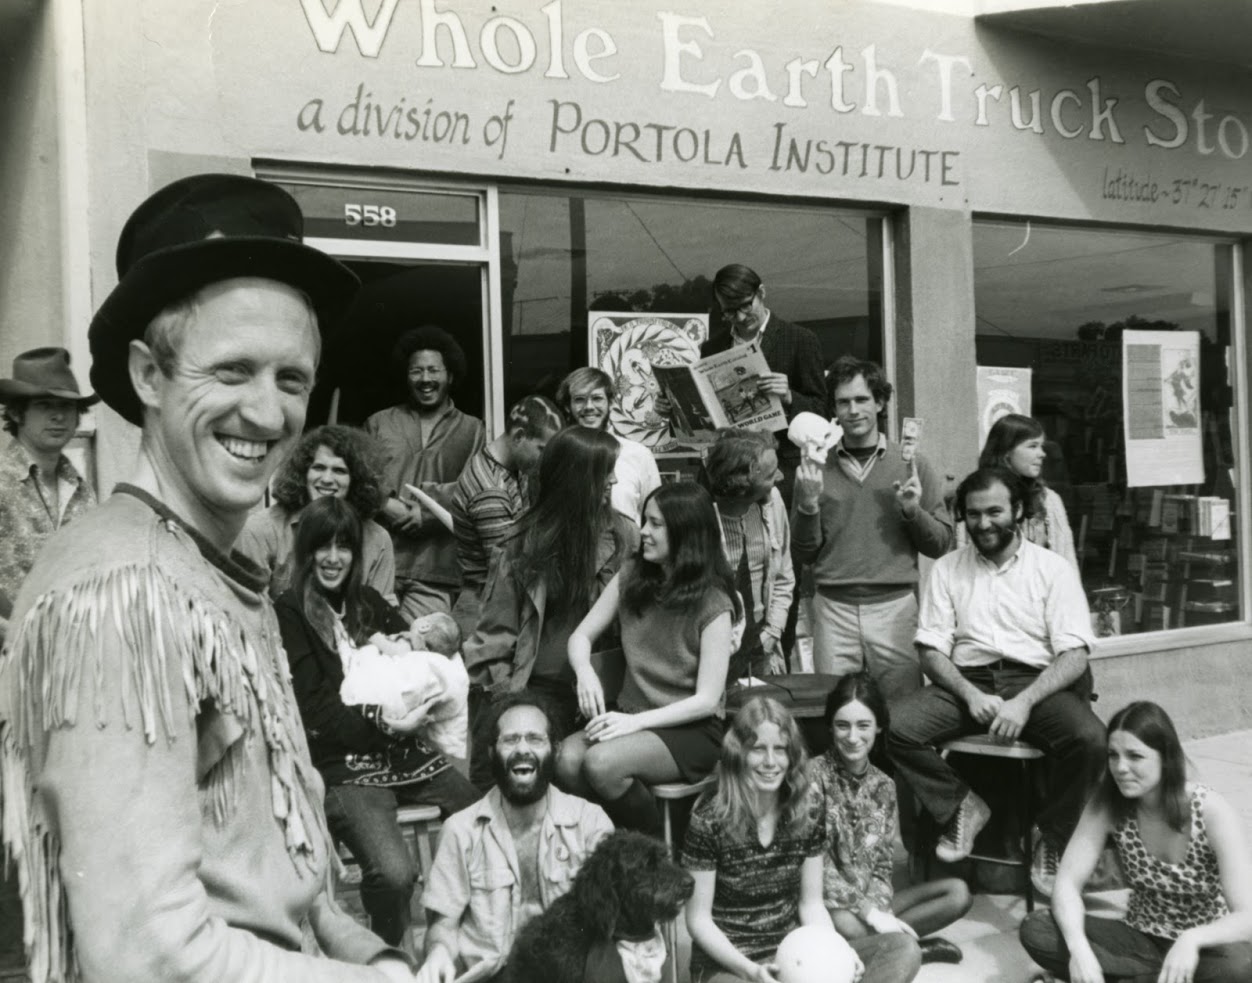 Stewart Brand & Whole Earth team, journal of wild culture, ©2020